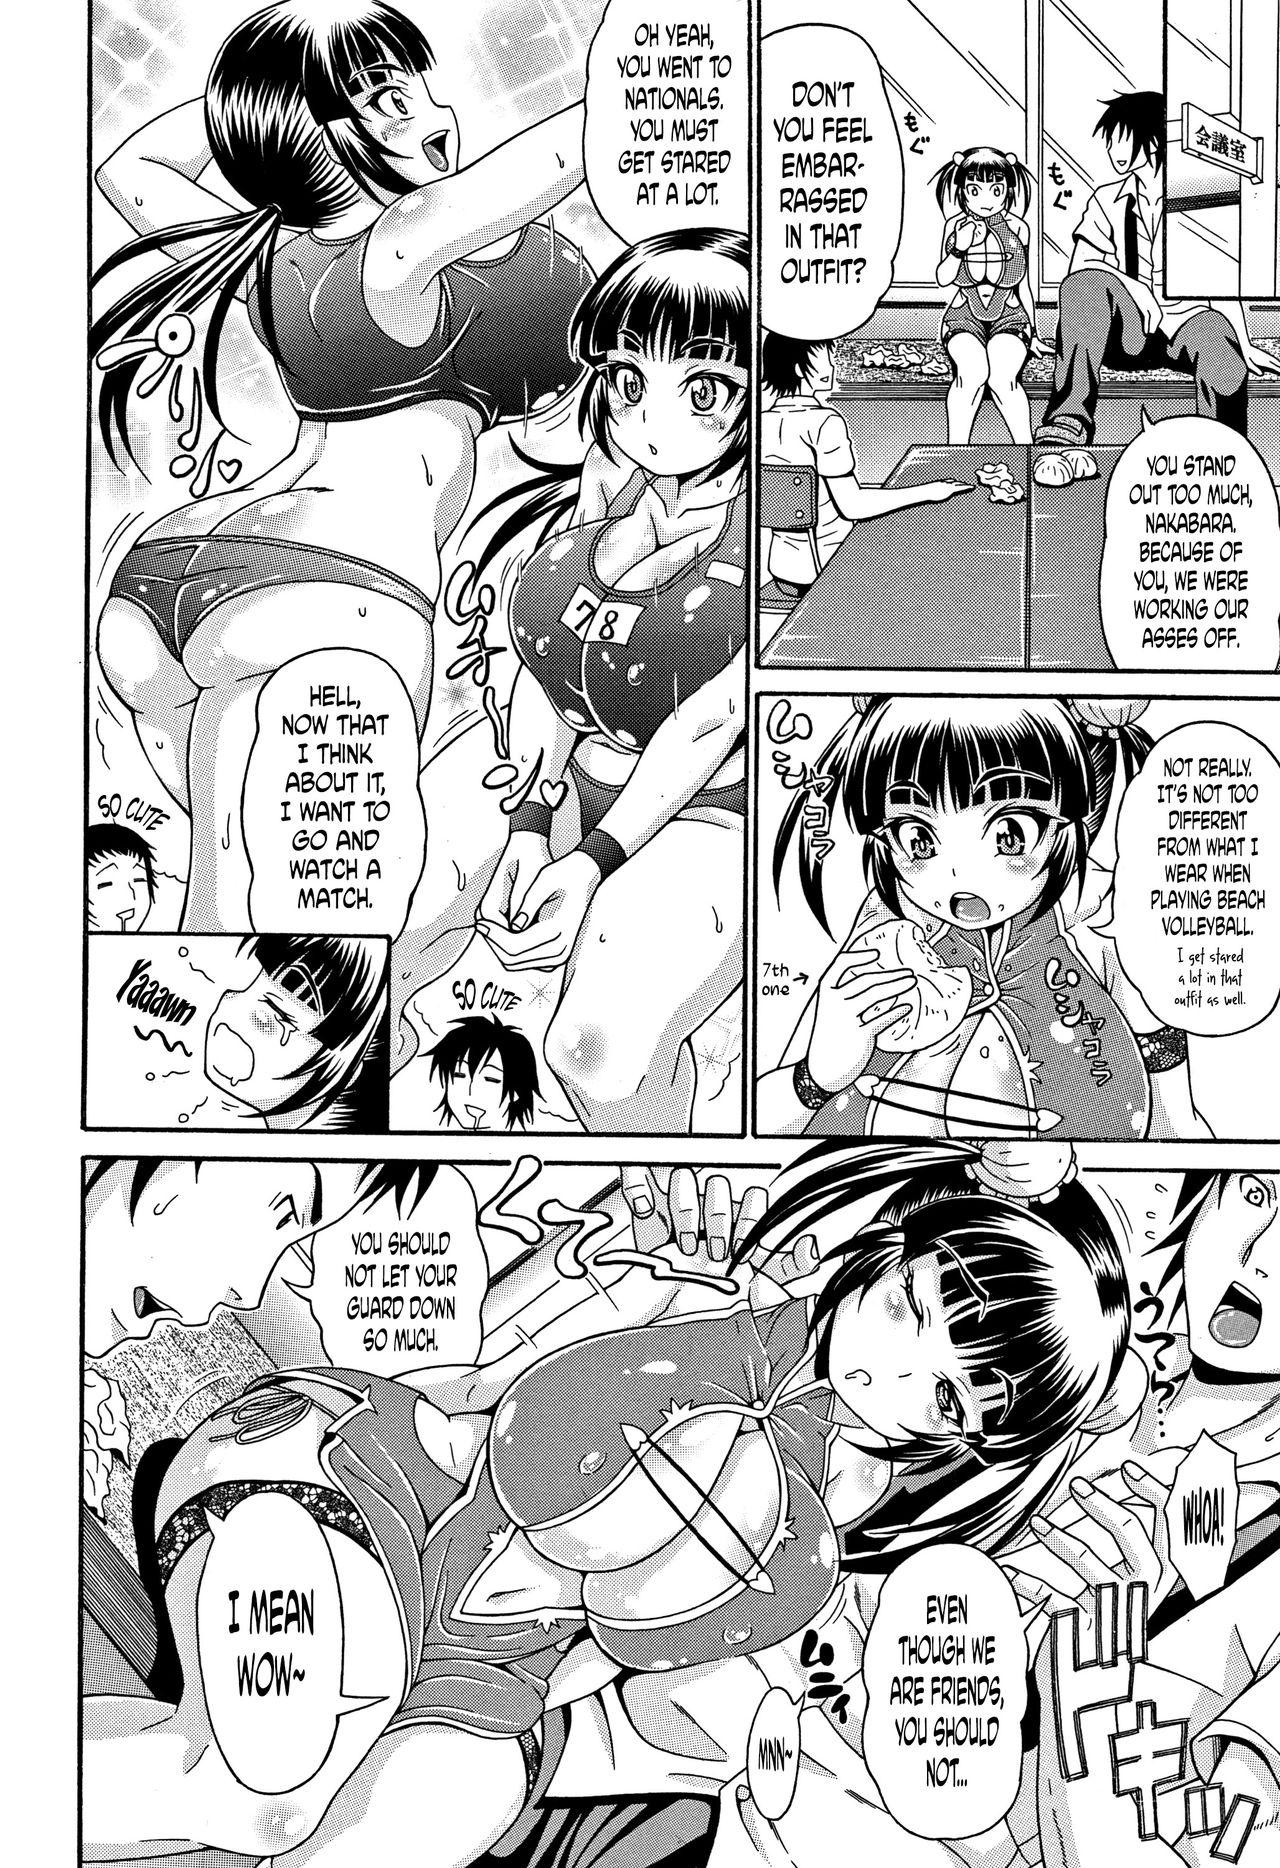 [Andou Hiroyuki] Mamire Chichi - Sticky Tits Feel Hot All Over. Ch.1-7 [English] [doujin-moe.us] 92